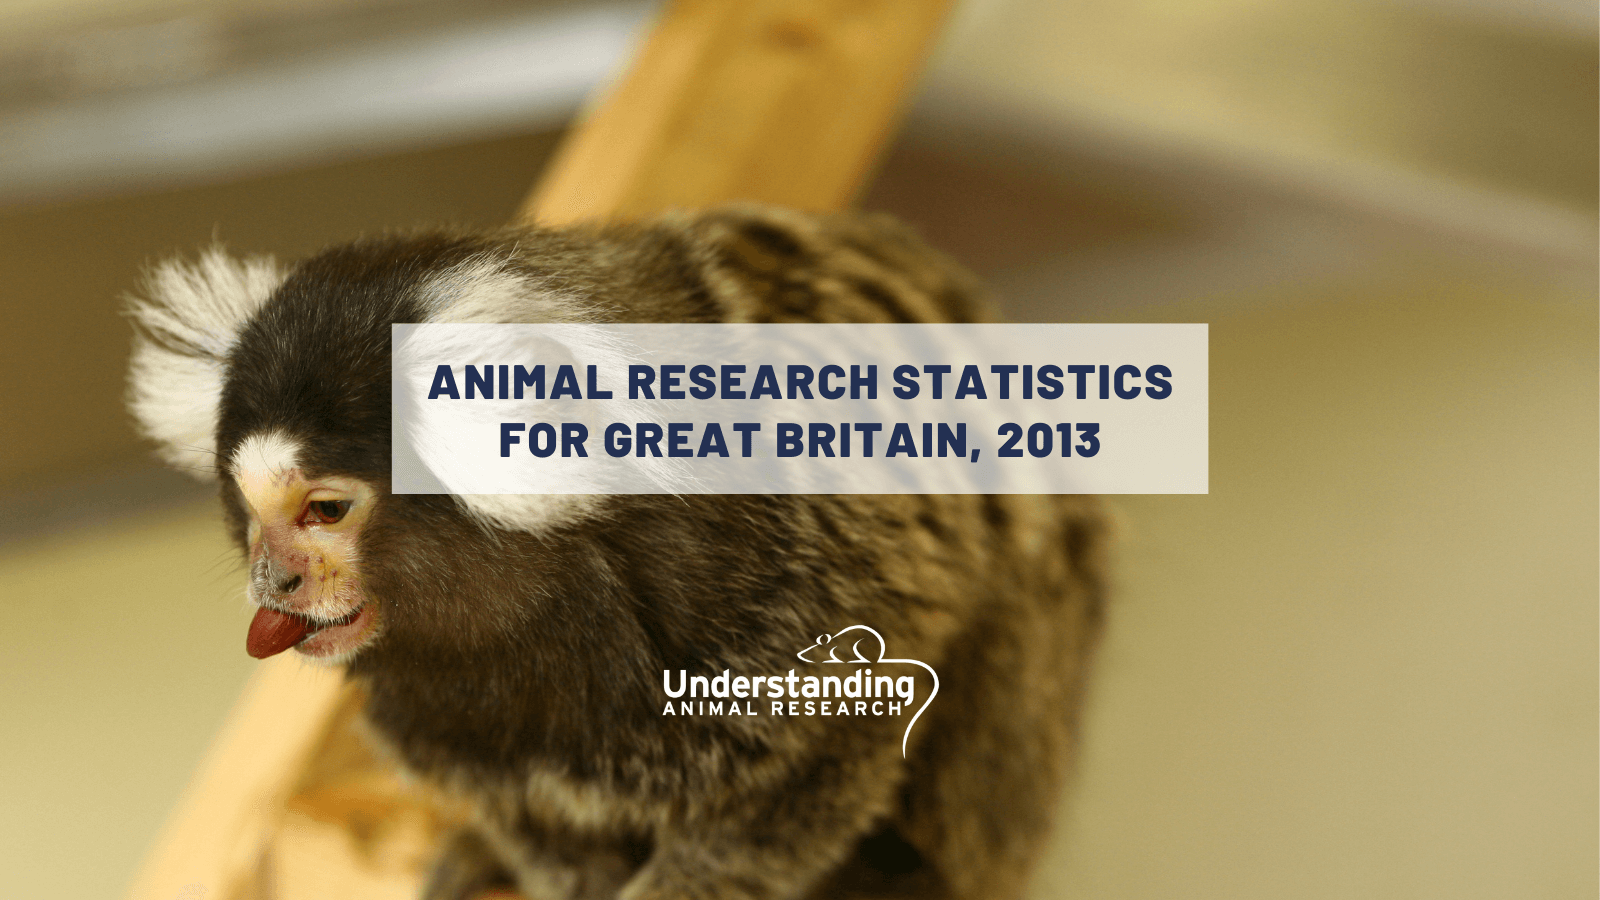 Animal research statistics for Great Britain, 2013